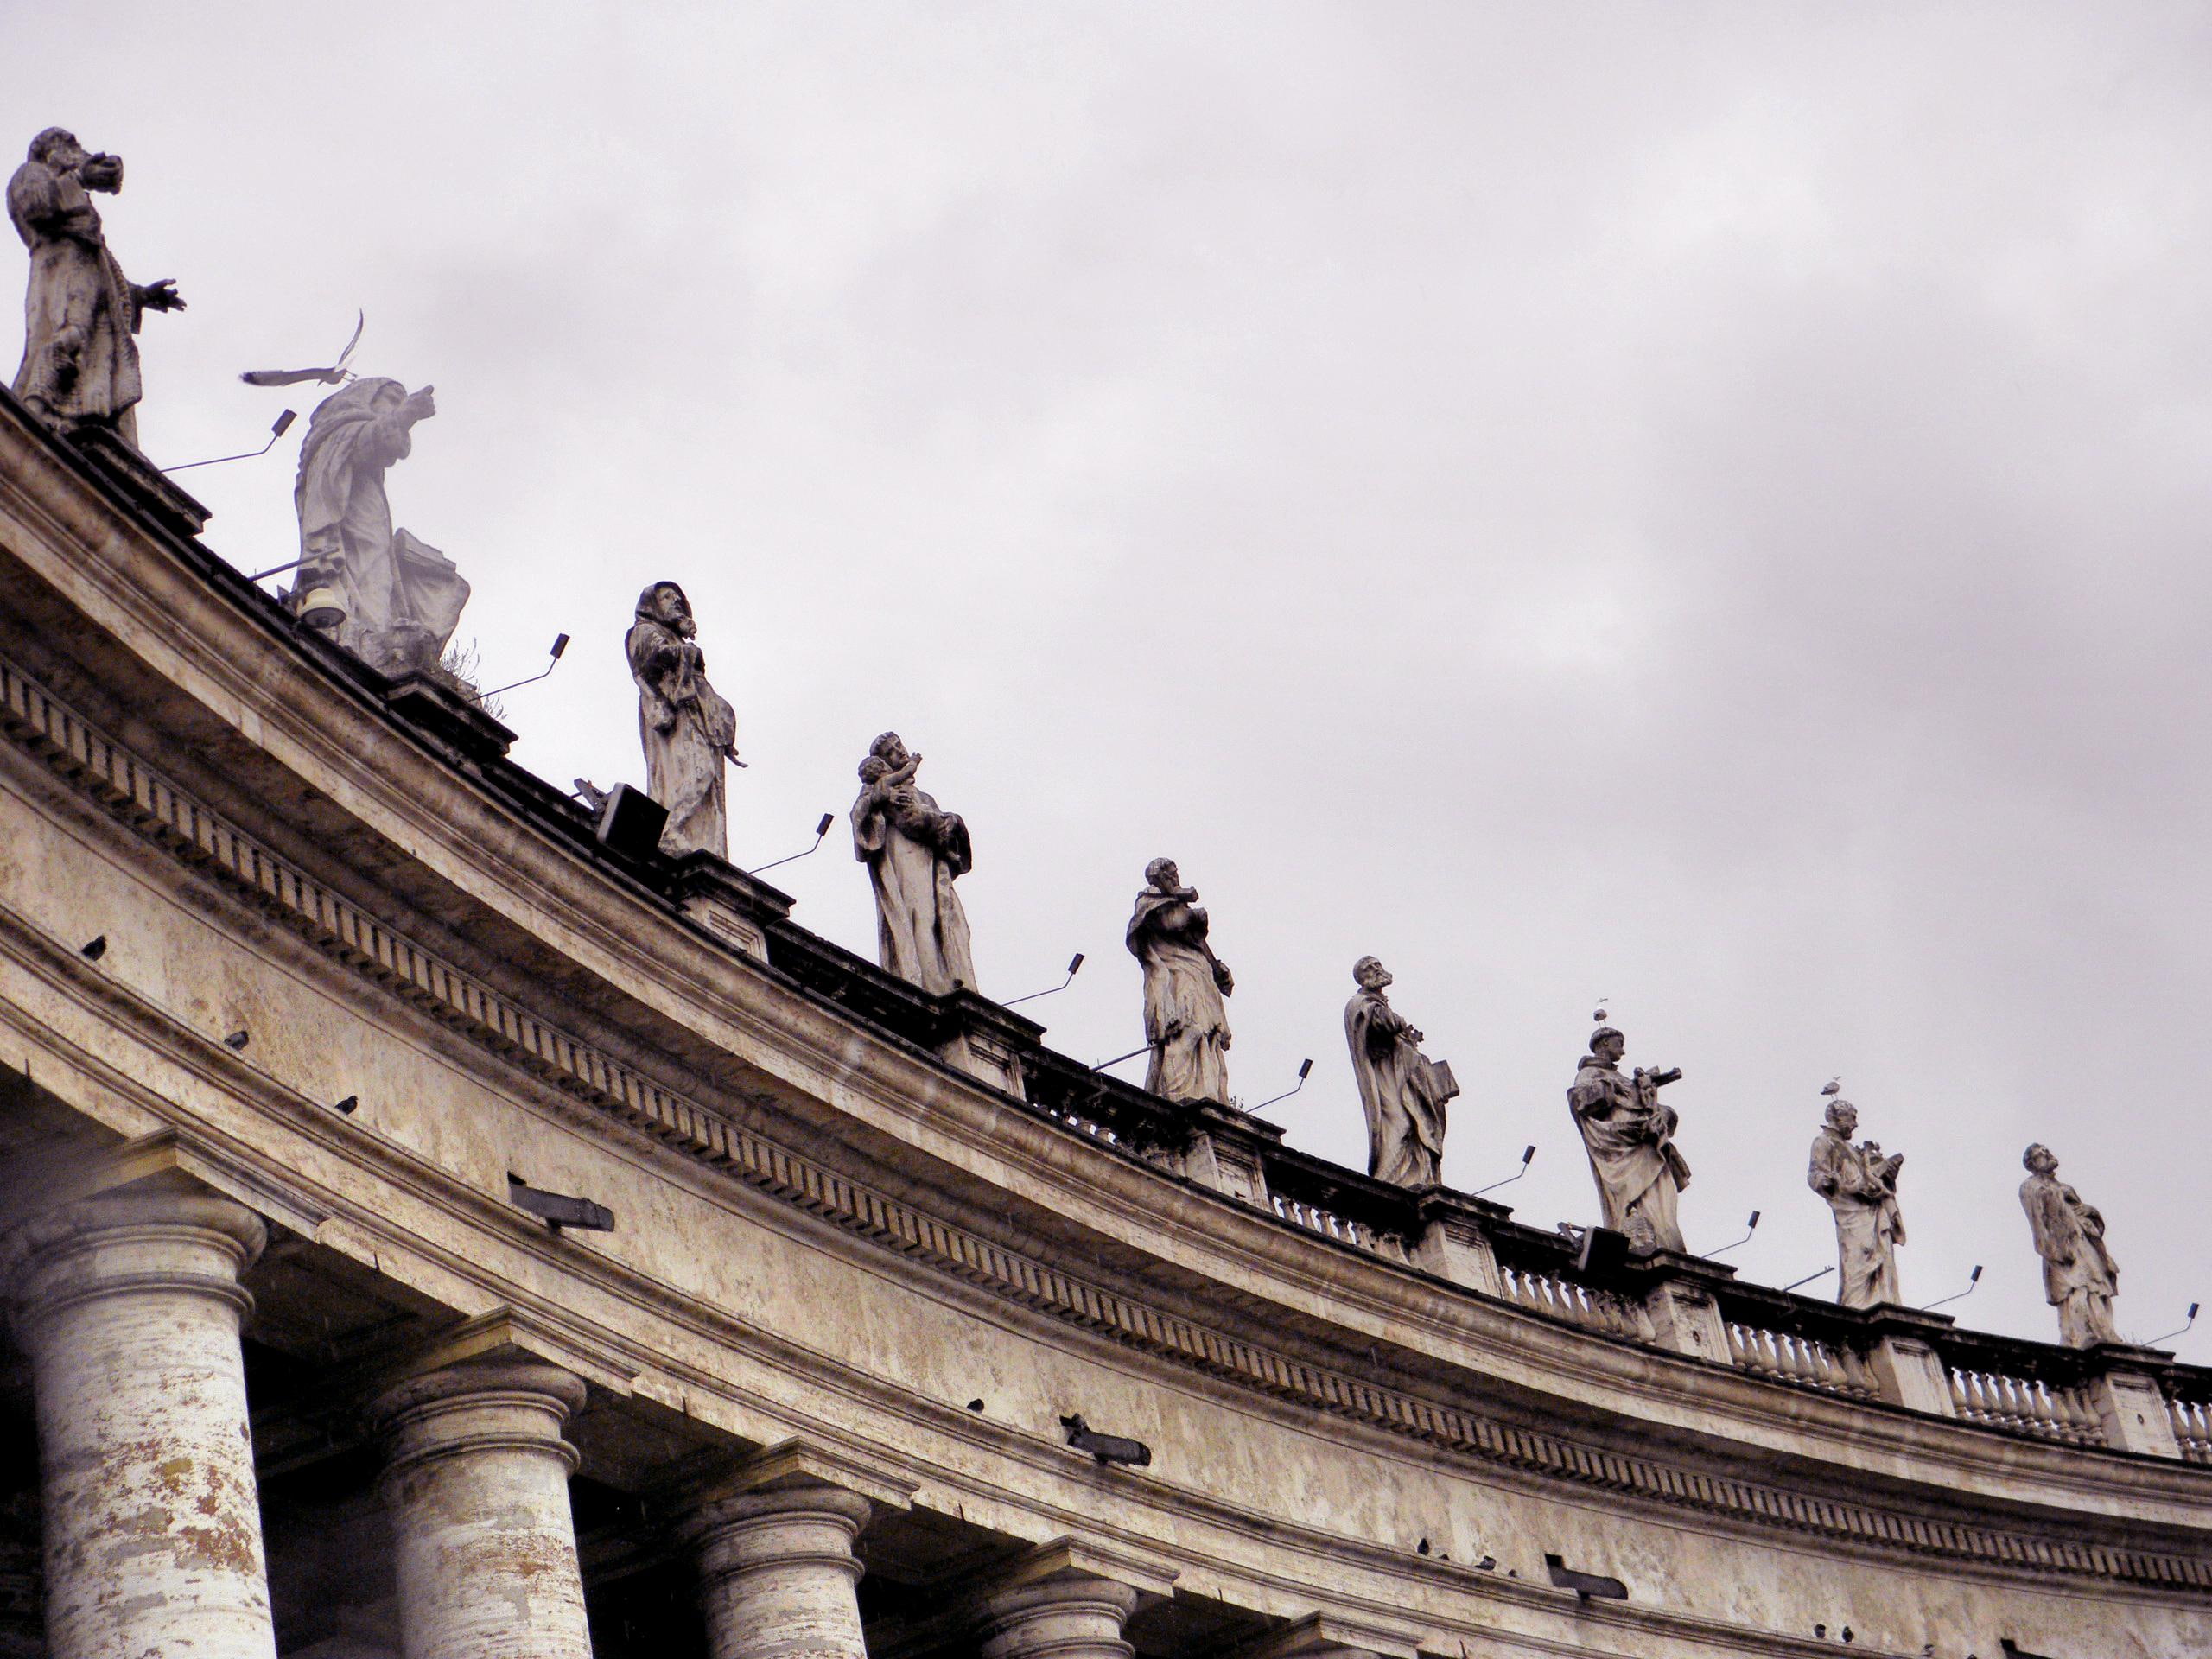 Vatican In Rome, human statues, pope, roma, catholic, animals